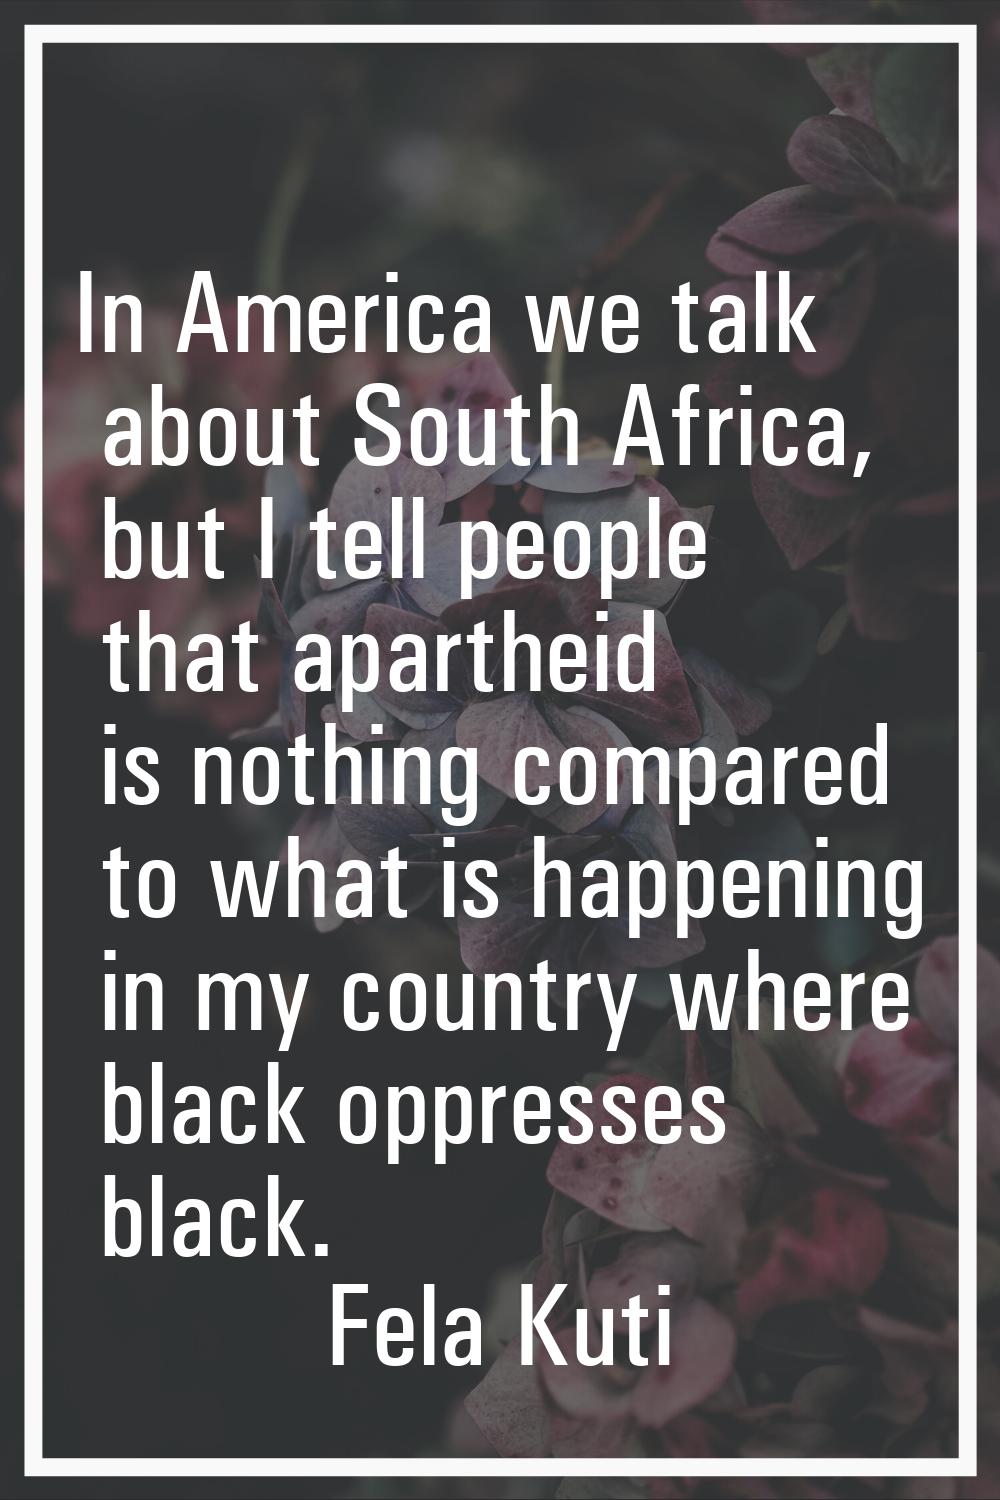 In America we talk about South Africa, but I tell people that apartheid is nothing compared to what